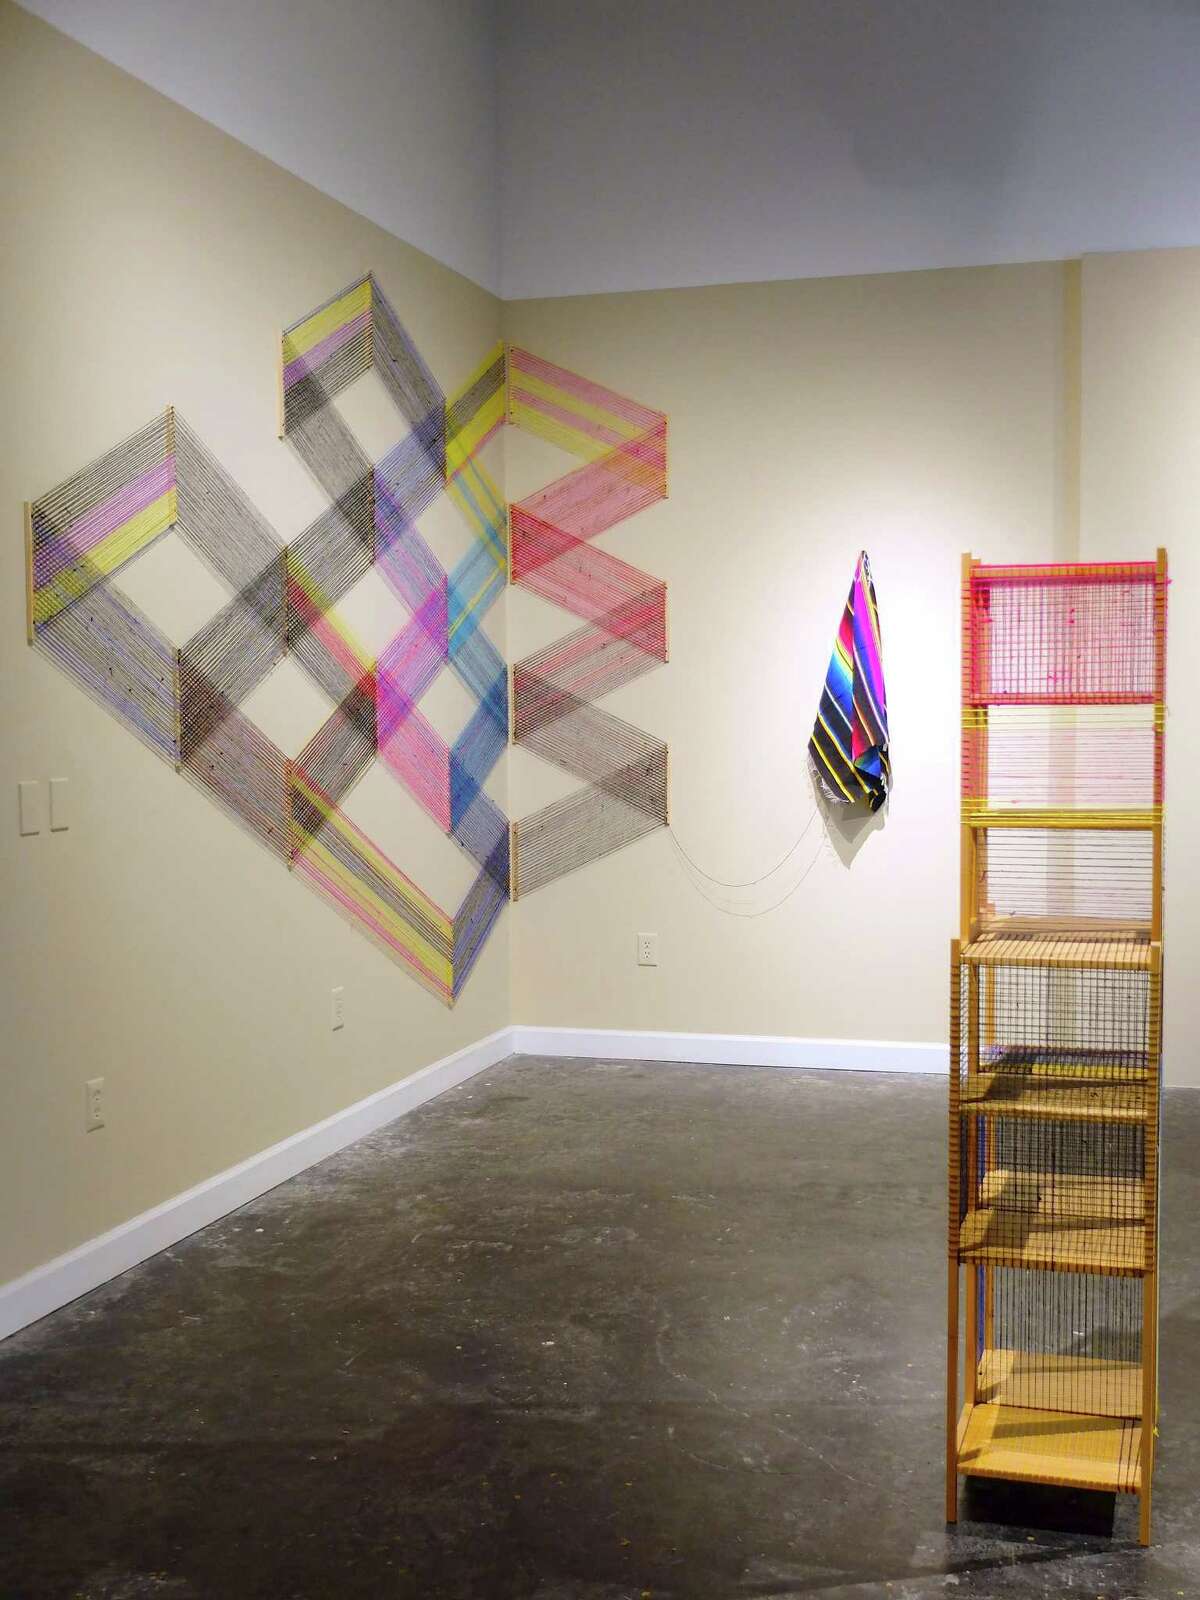 Adrian Esparza's site-specific installation "Spectra" is on view at Houston Center for Contemporary Craft through May 11.